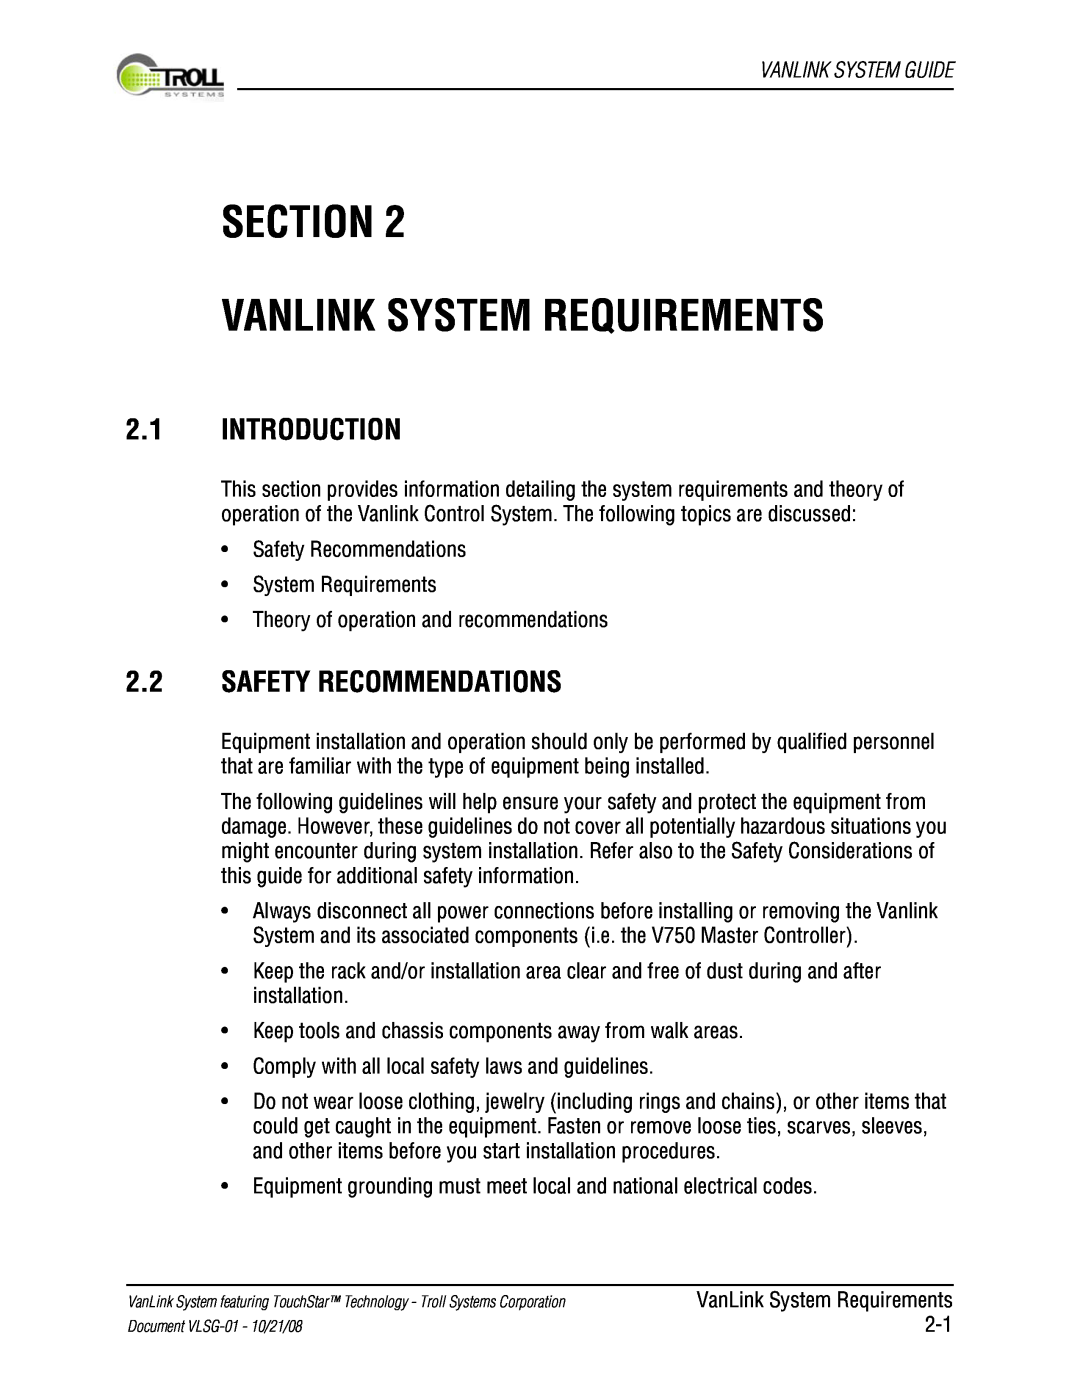 Kyocera VLSG-01 Section Vanlink System Requirements, 2.1INTRODUCTION, 2.2SAFETY RECOMMENDATIONS, Vanlink System Guide 